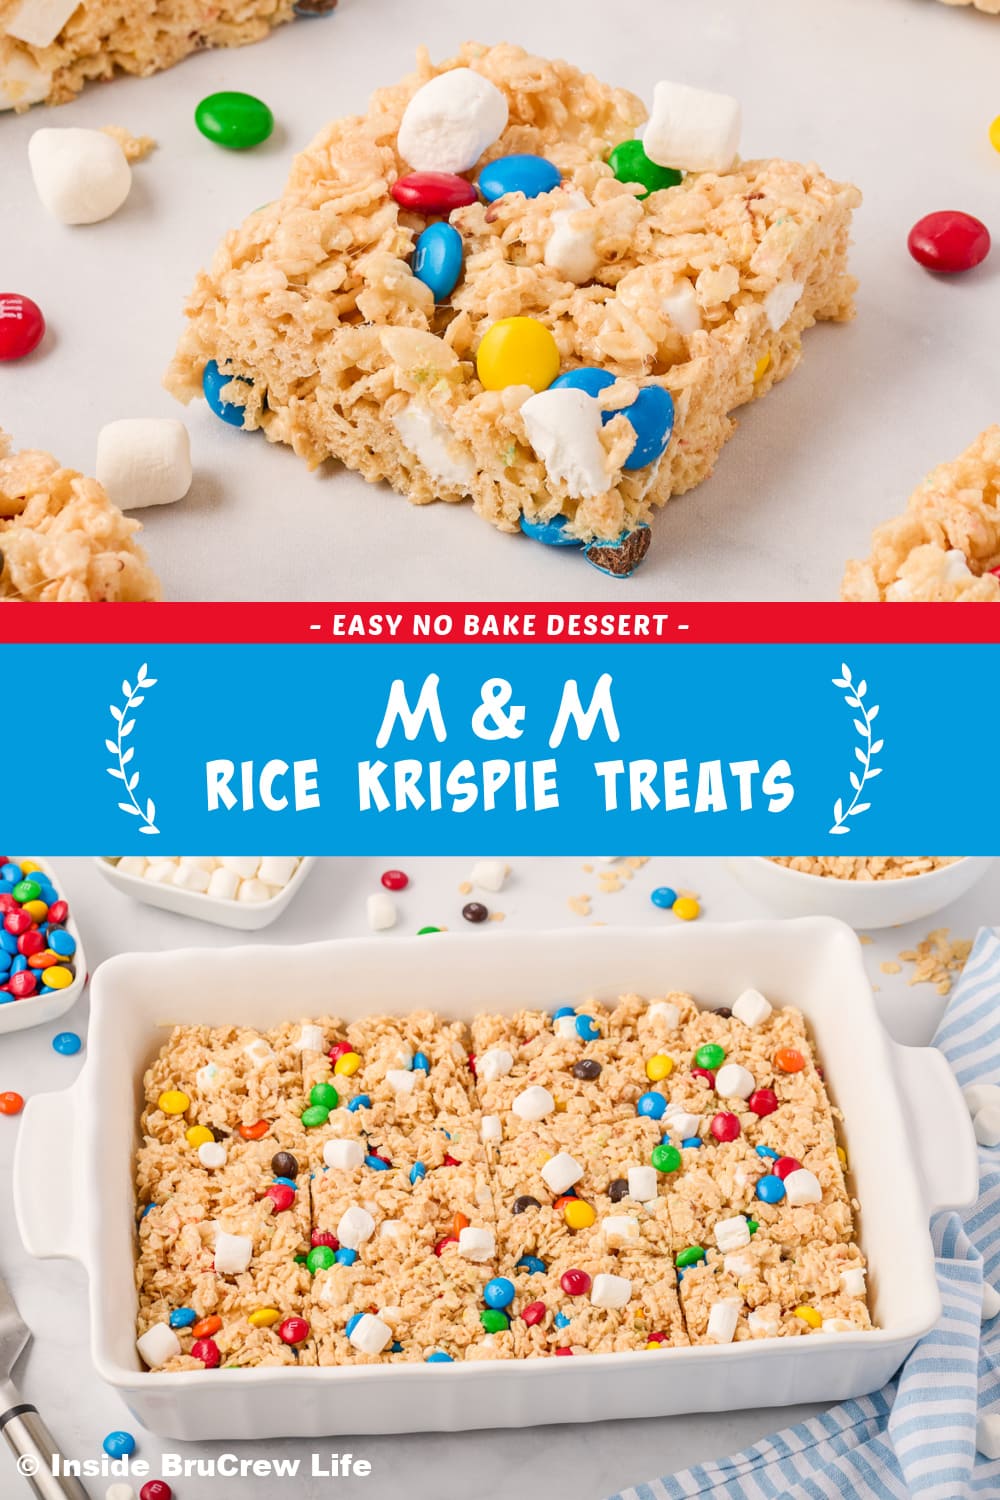 Two pictures of M&M rice krispie treats collaged together with a blue text box.